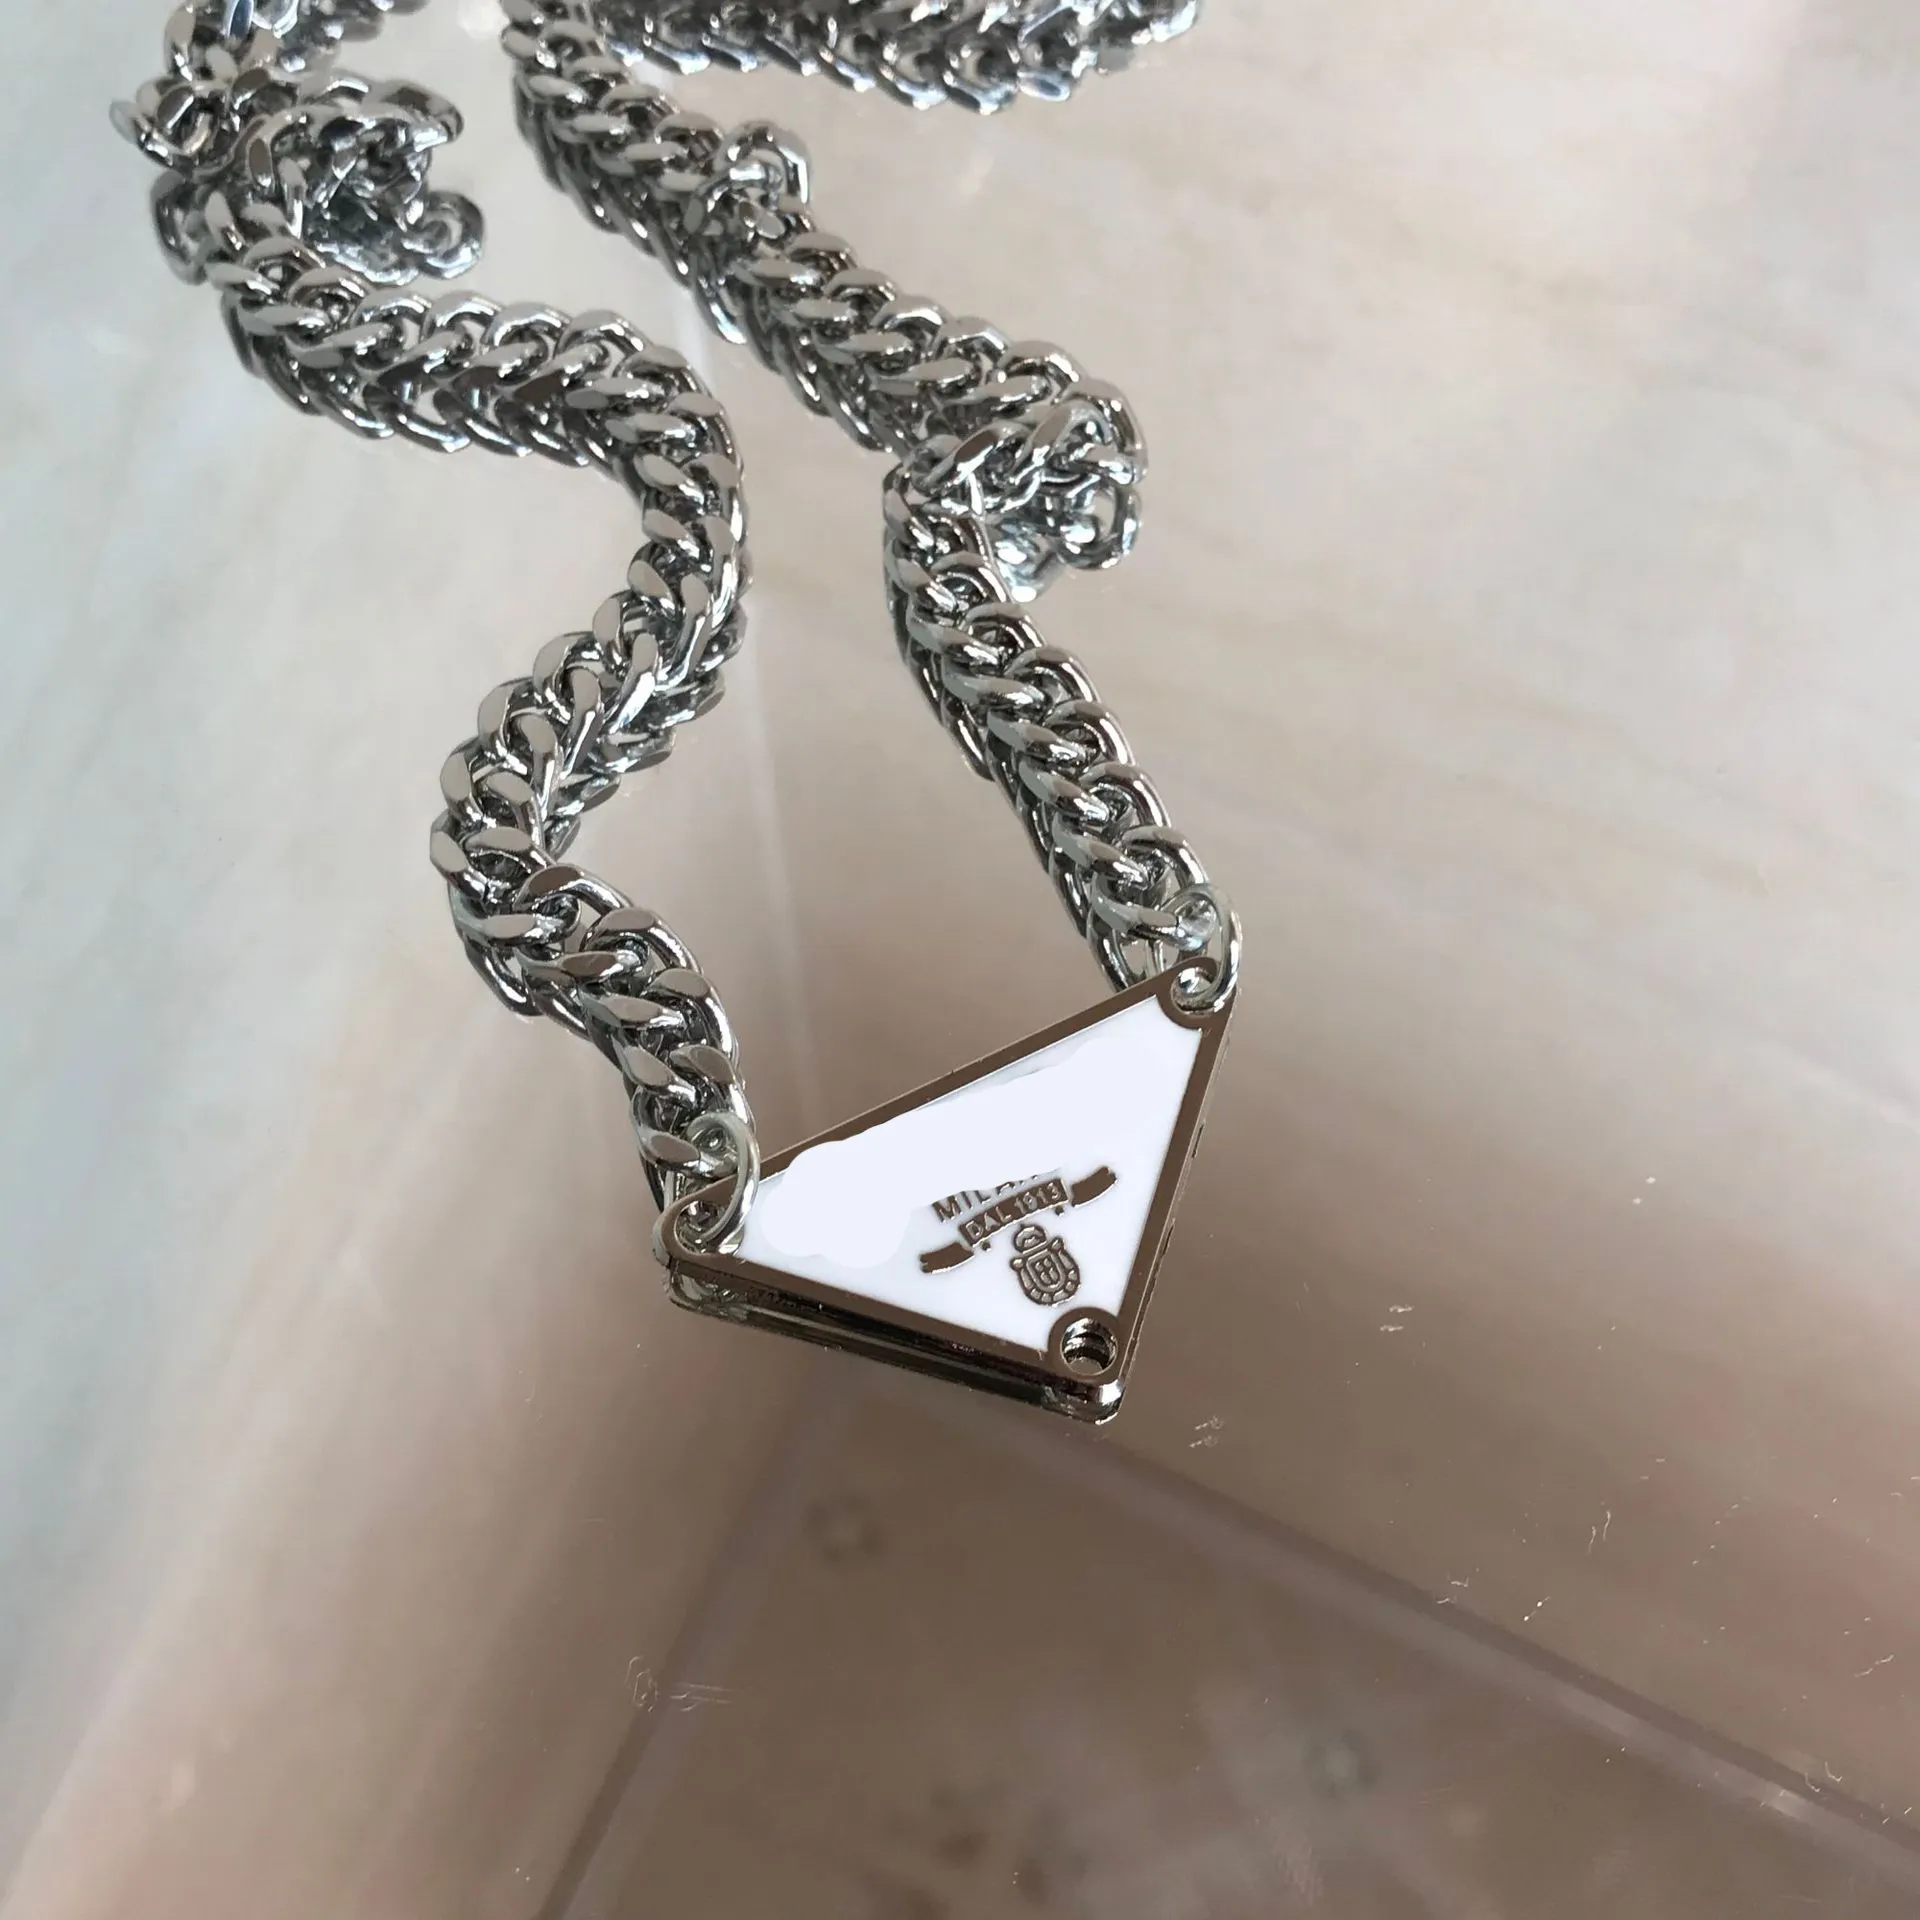 Womens Mens Luxury Designer necklace Chain Fashion Jewelry Black White P Triangle Pendant Design Party Silver Men Necklaces Jewell283D